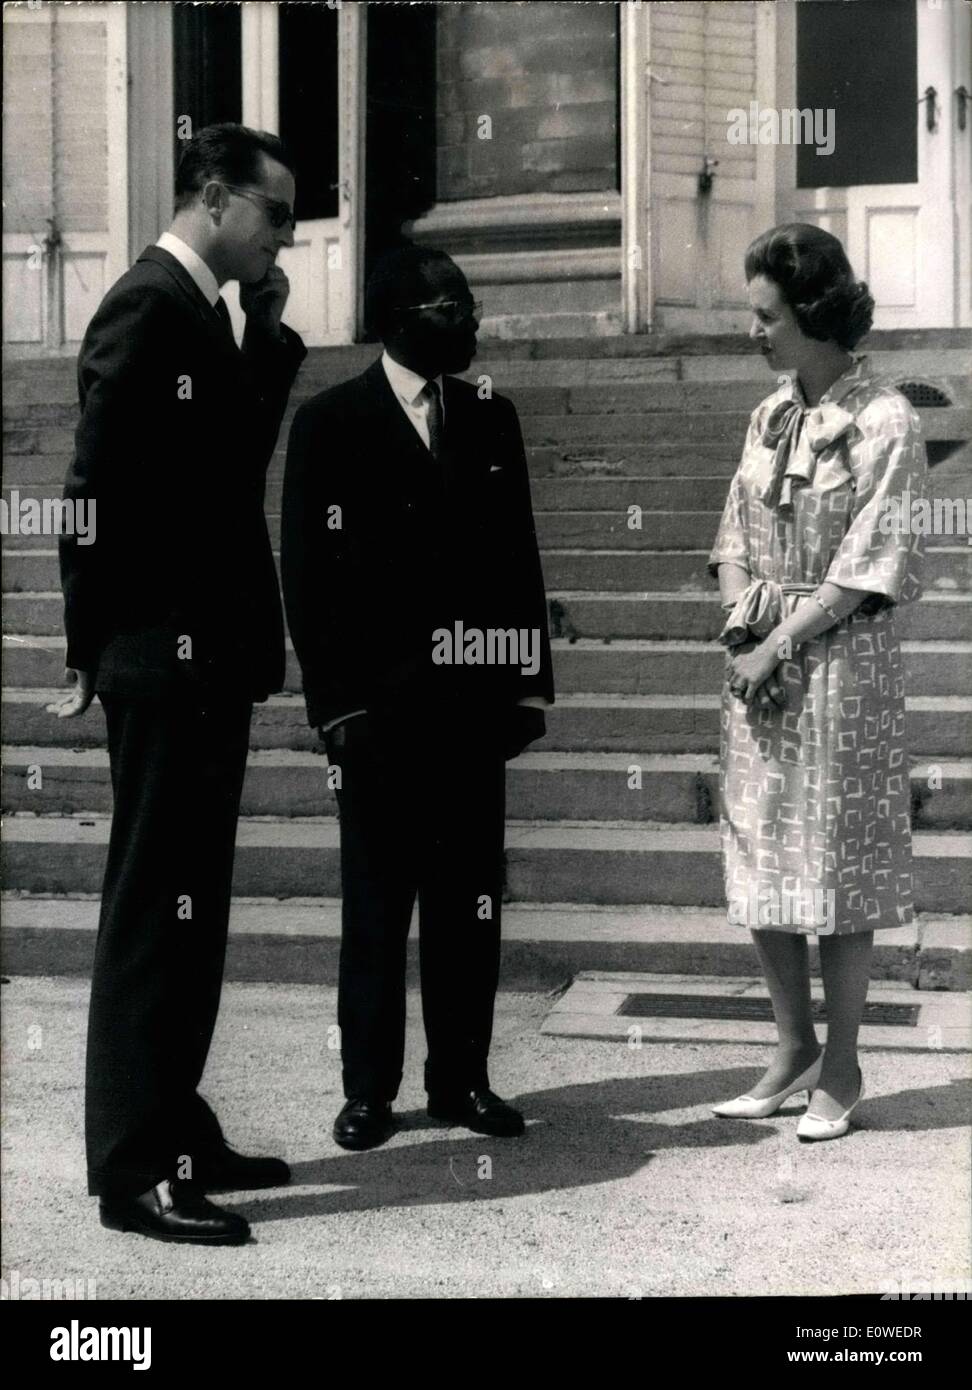 Jul. 24, 1962 - Senegal president, Leopold Senghor, is in Brussels on a private visit. Yesterday he was received by the king and queen at Laeken Chateau. Here is Senghor with King Baudouin and Queen Fabiola. Stock Photo